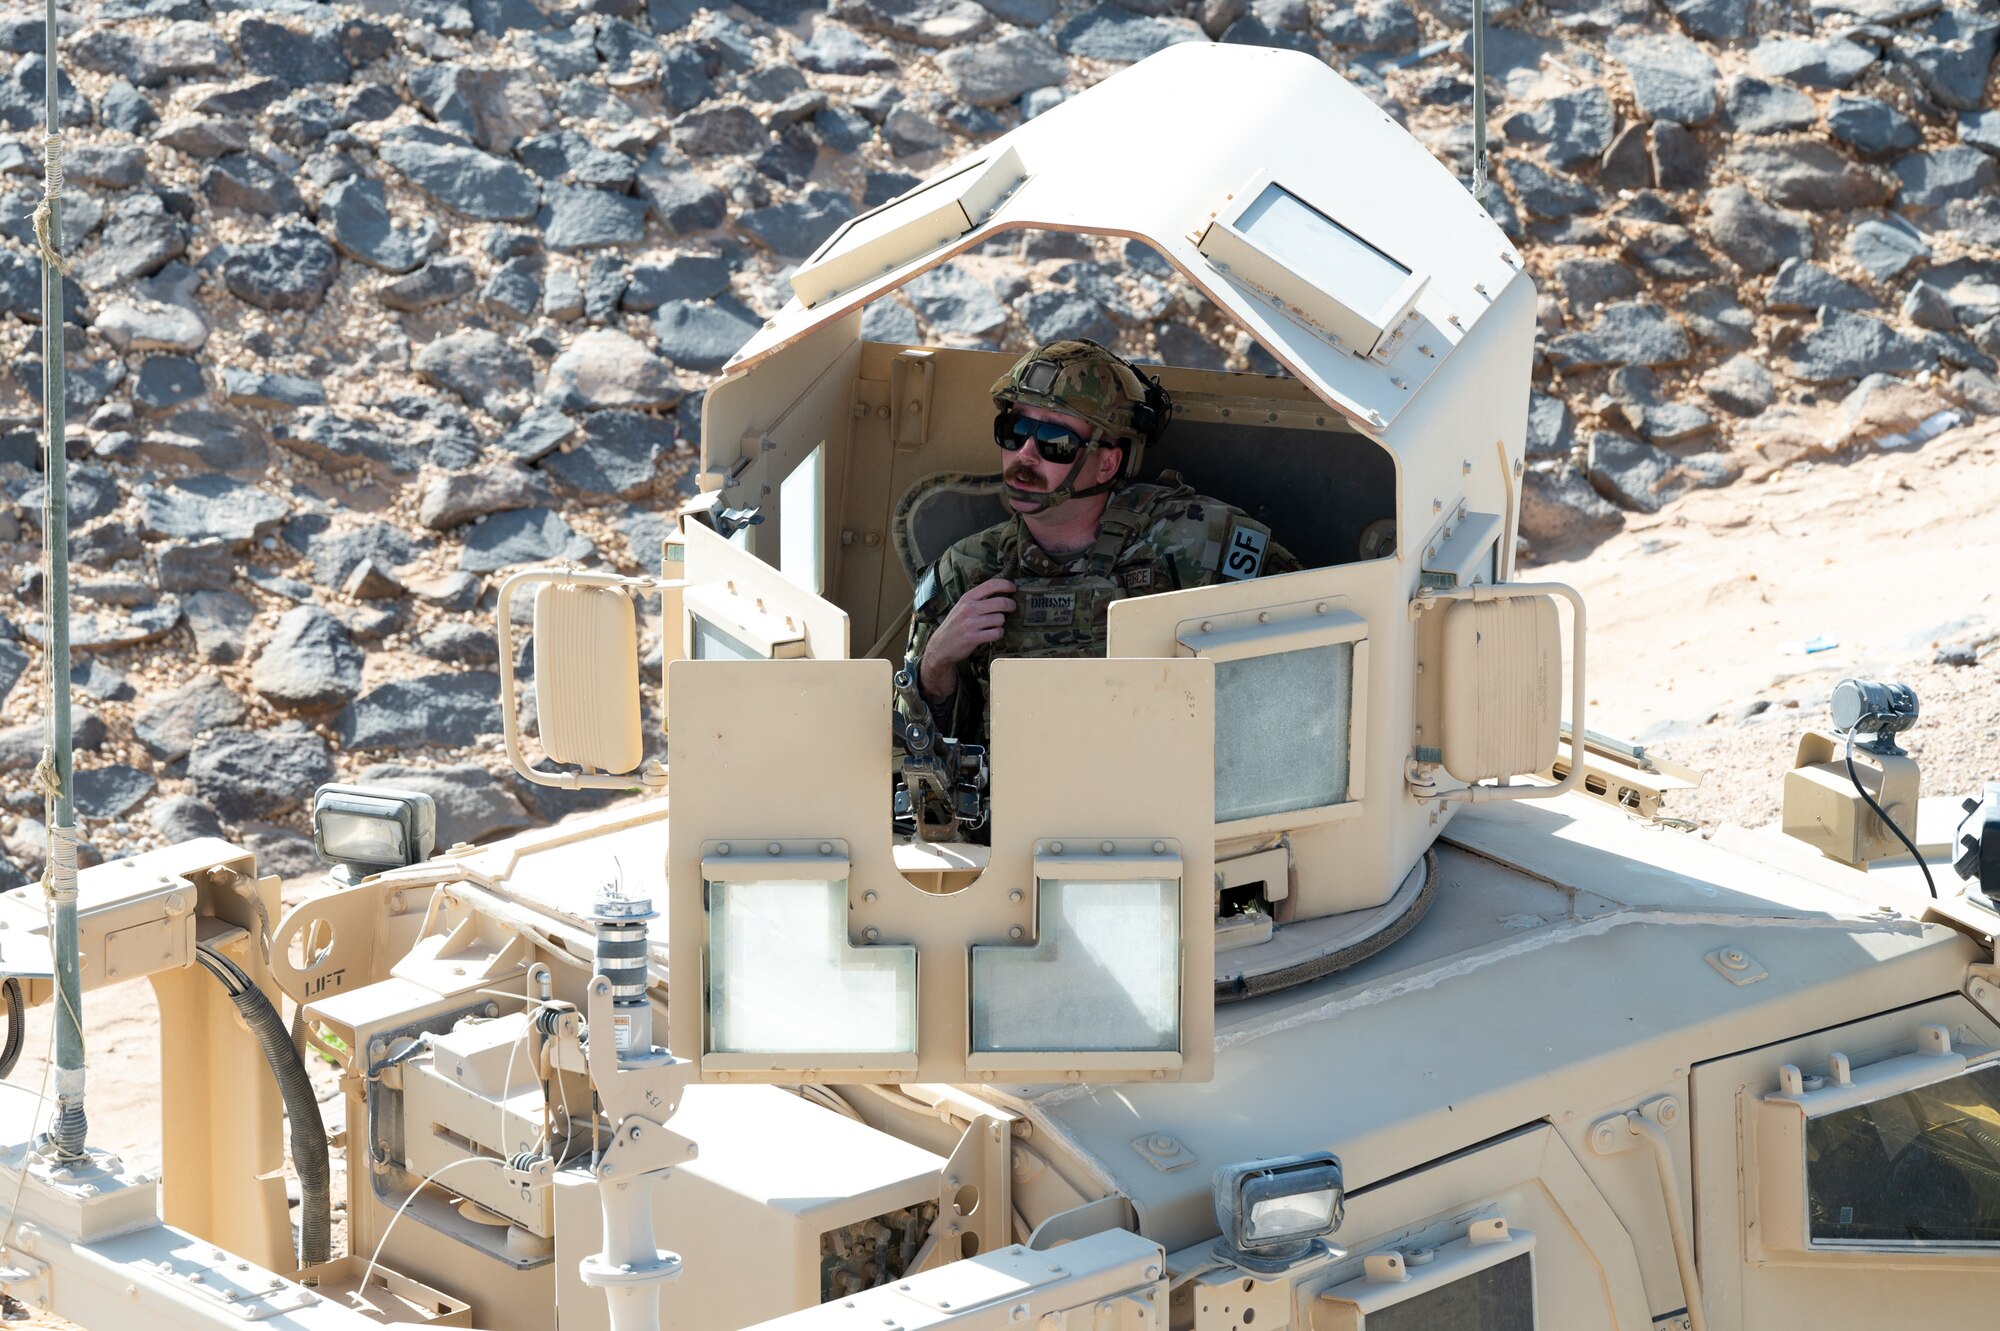 A U.S. Air Force Airman assigned to the 332d Expeditionary Security Forces Squadron patrols the base in a Mine-Resistant Ambush Protected All-Terrain Vehicle during a mass casualty training scenario at an undisclosed location in Southwest Asia, March 13, 2023.